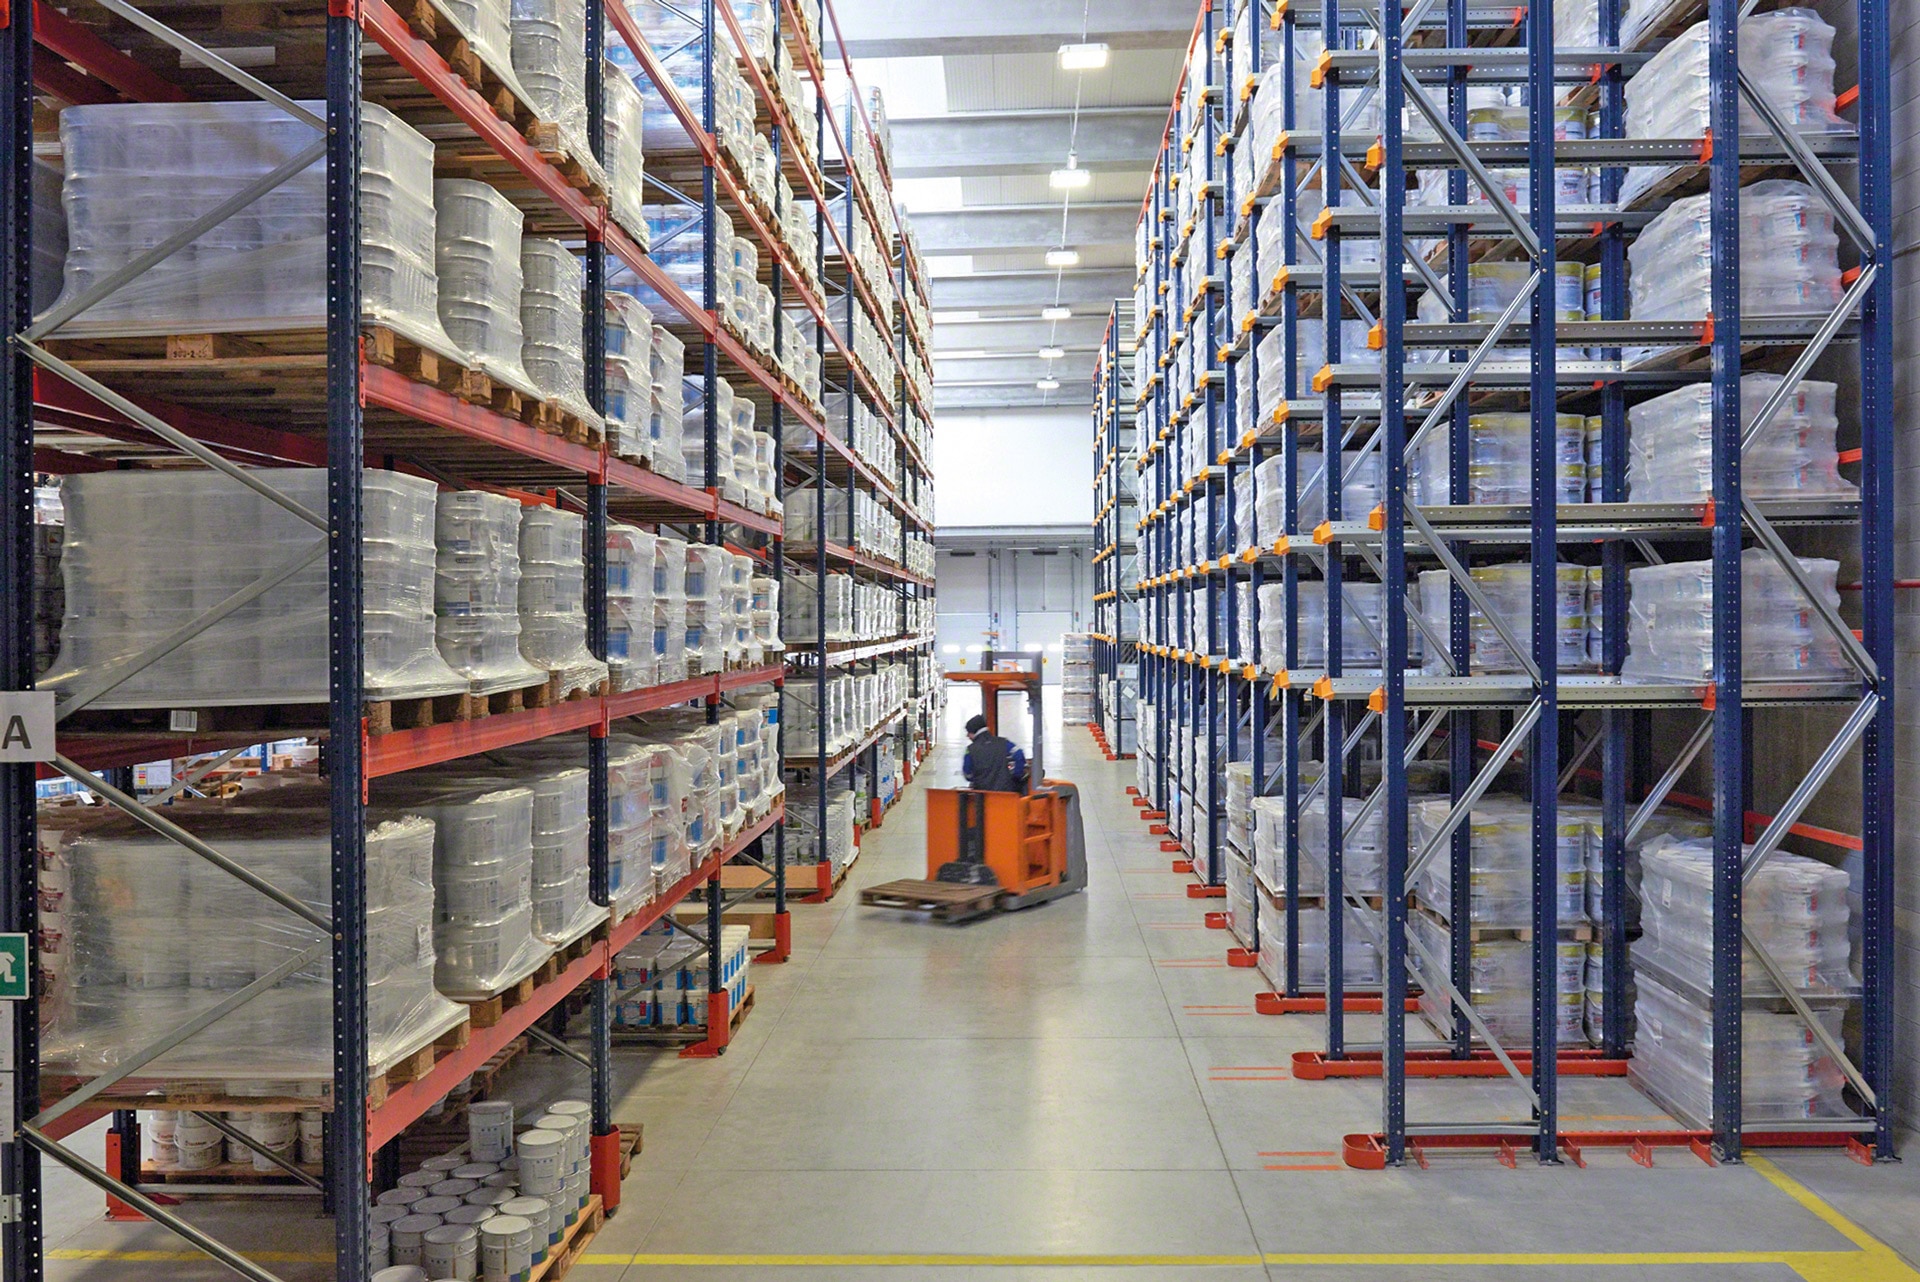 In order to optimise the operation of a warehouse, drive-in racks tend to be combined with other storage systems